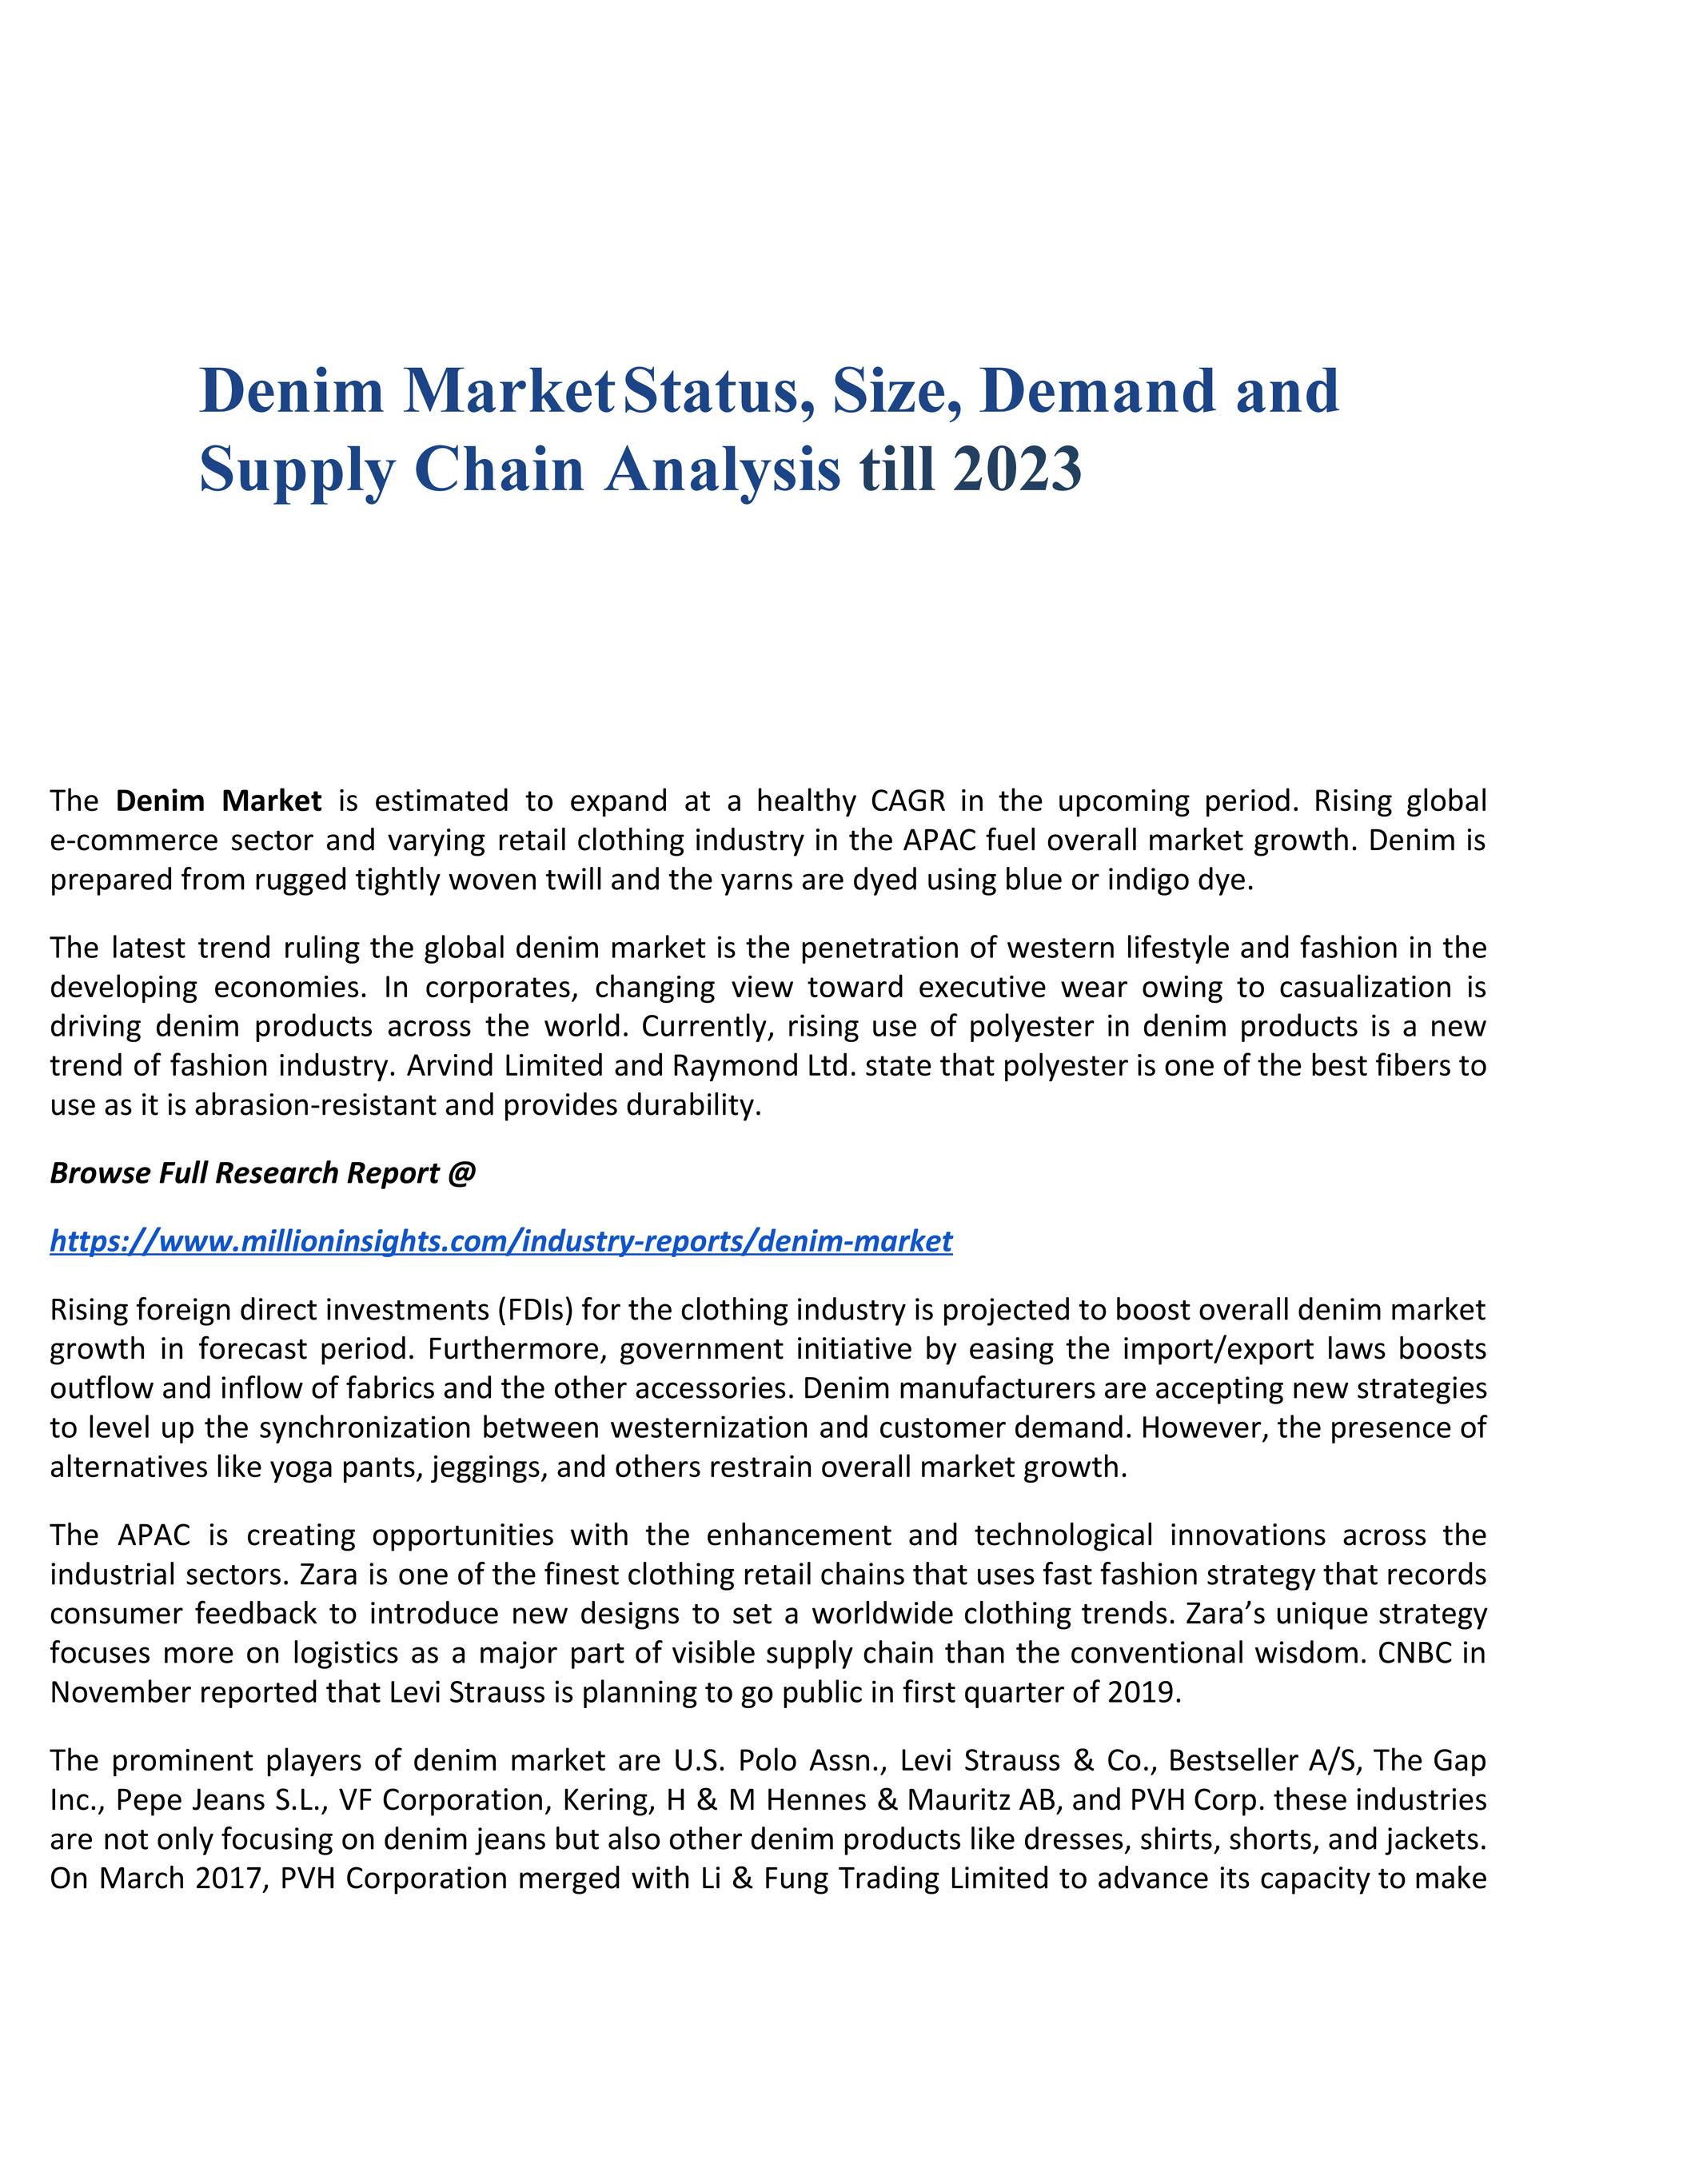 PPT – Denim Market Growth, Segments, Size, Industry Analysis and  Opportunities 2023 PowerPoint presentation | free to download - id:  90d87a-MjkwY